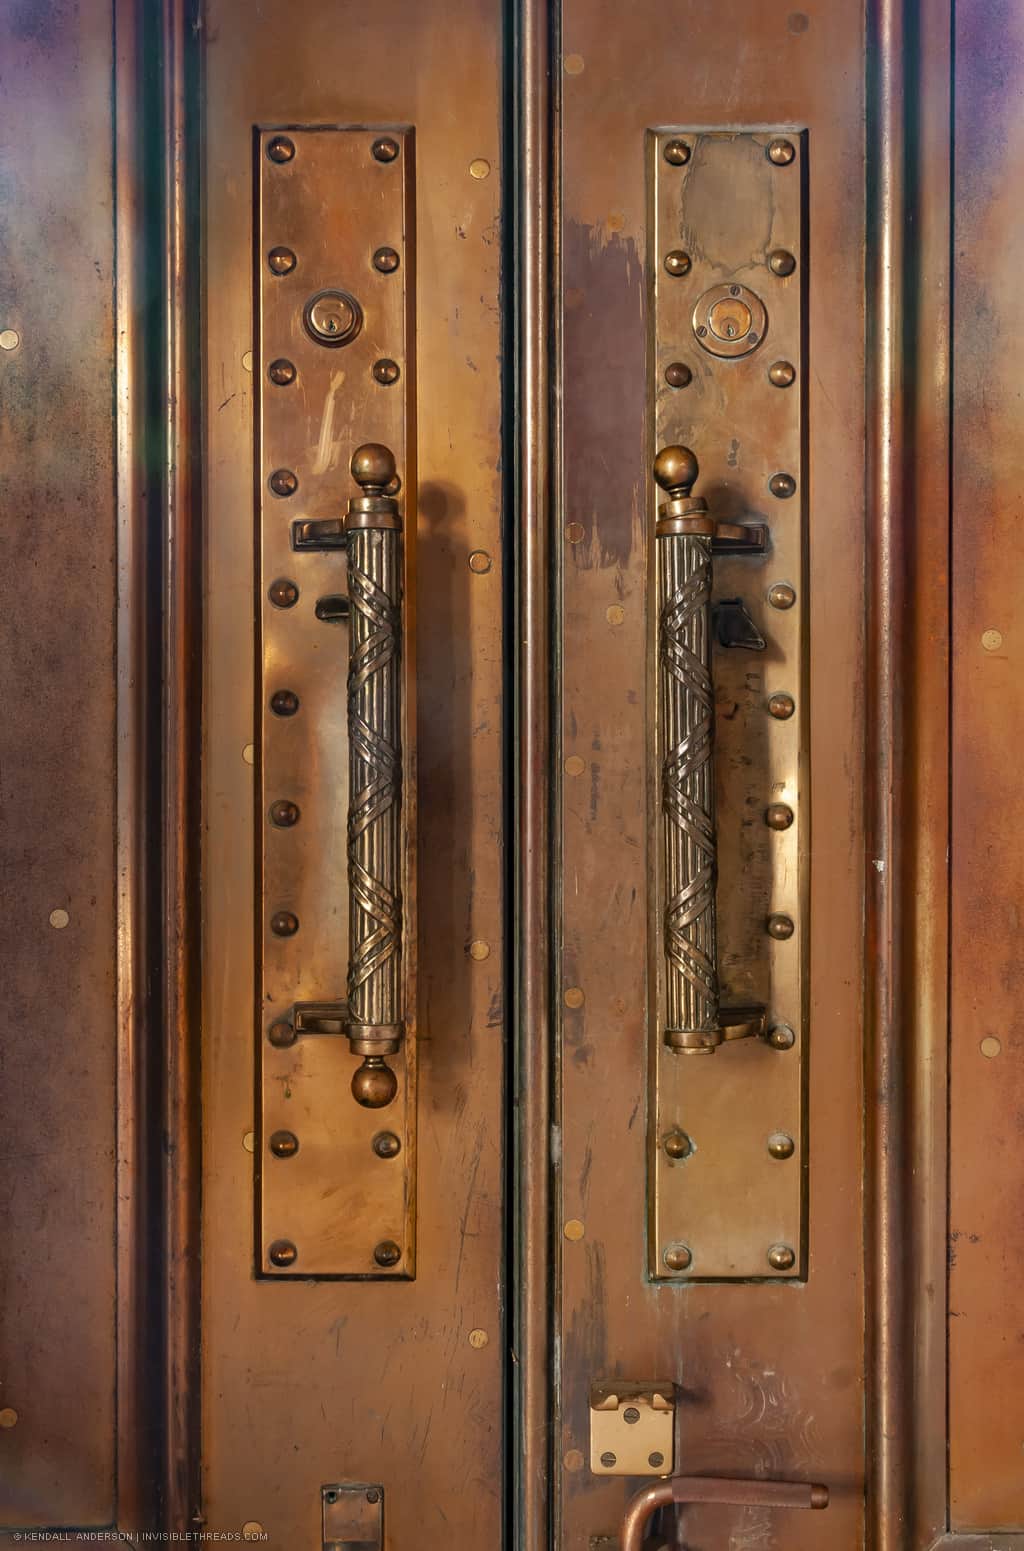 Ornate solid brass door handles are mounted on plates on solid copper doors.